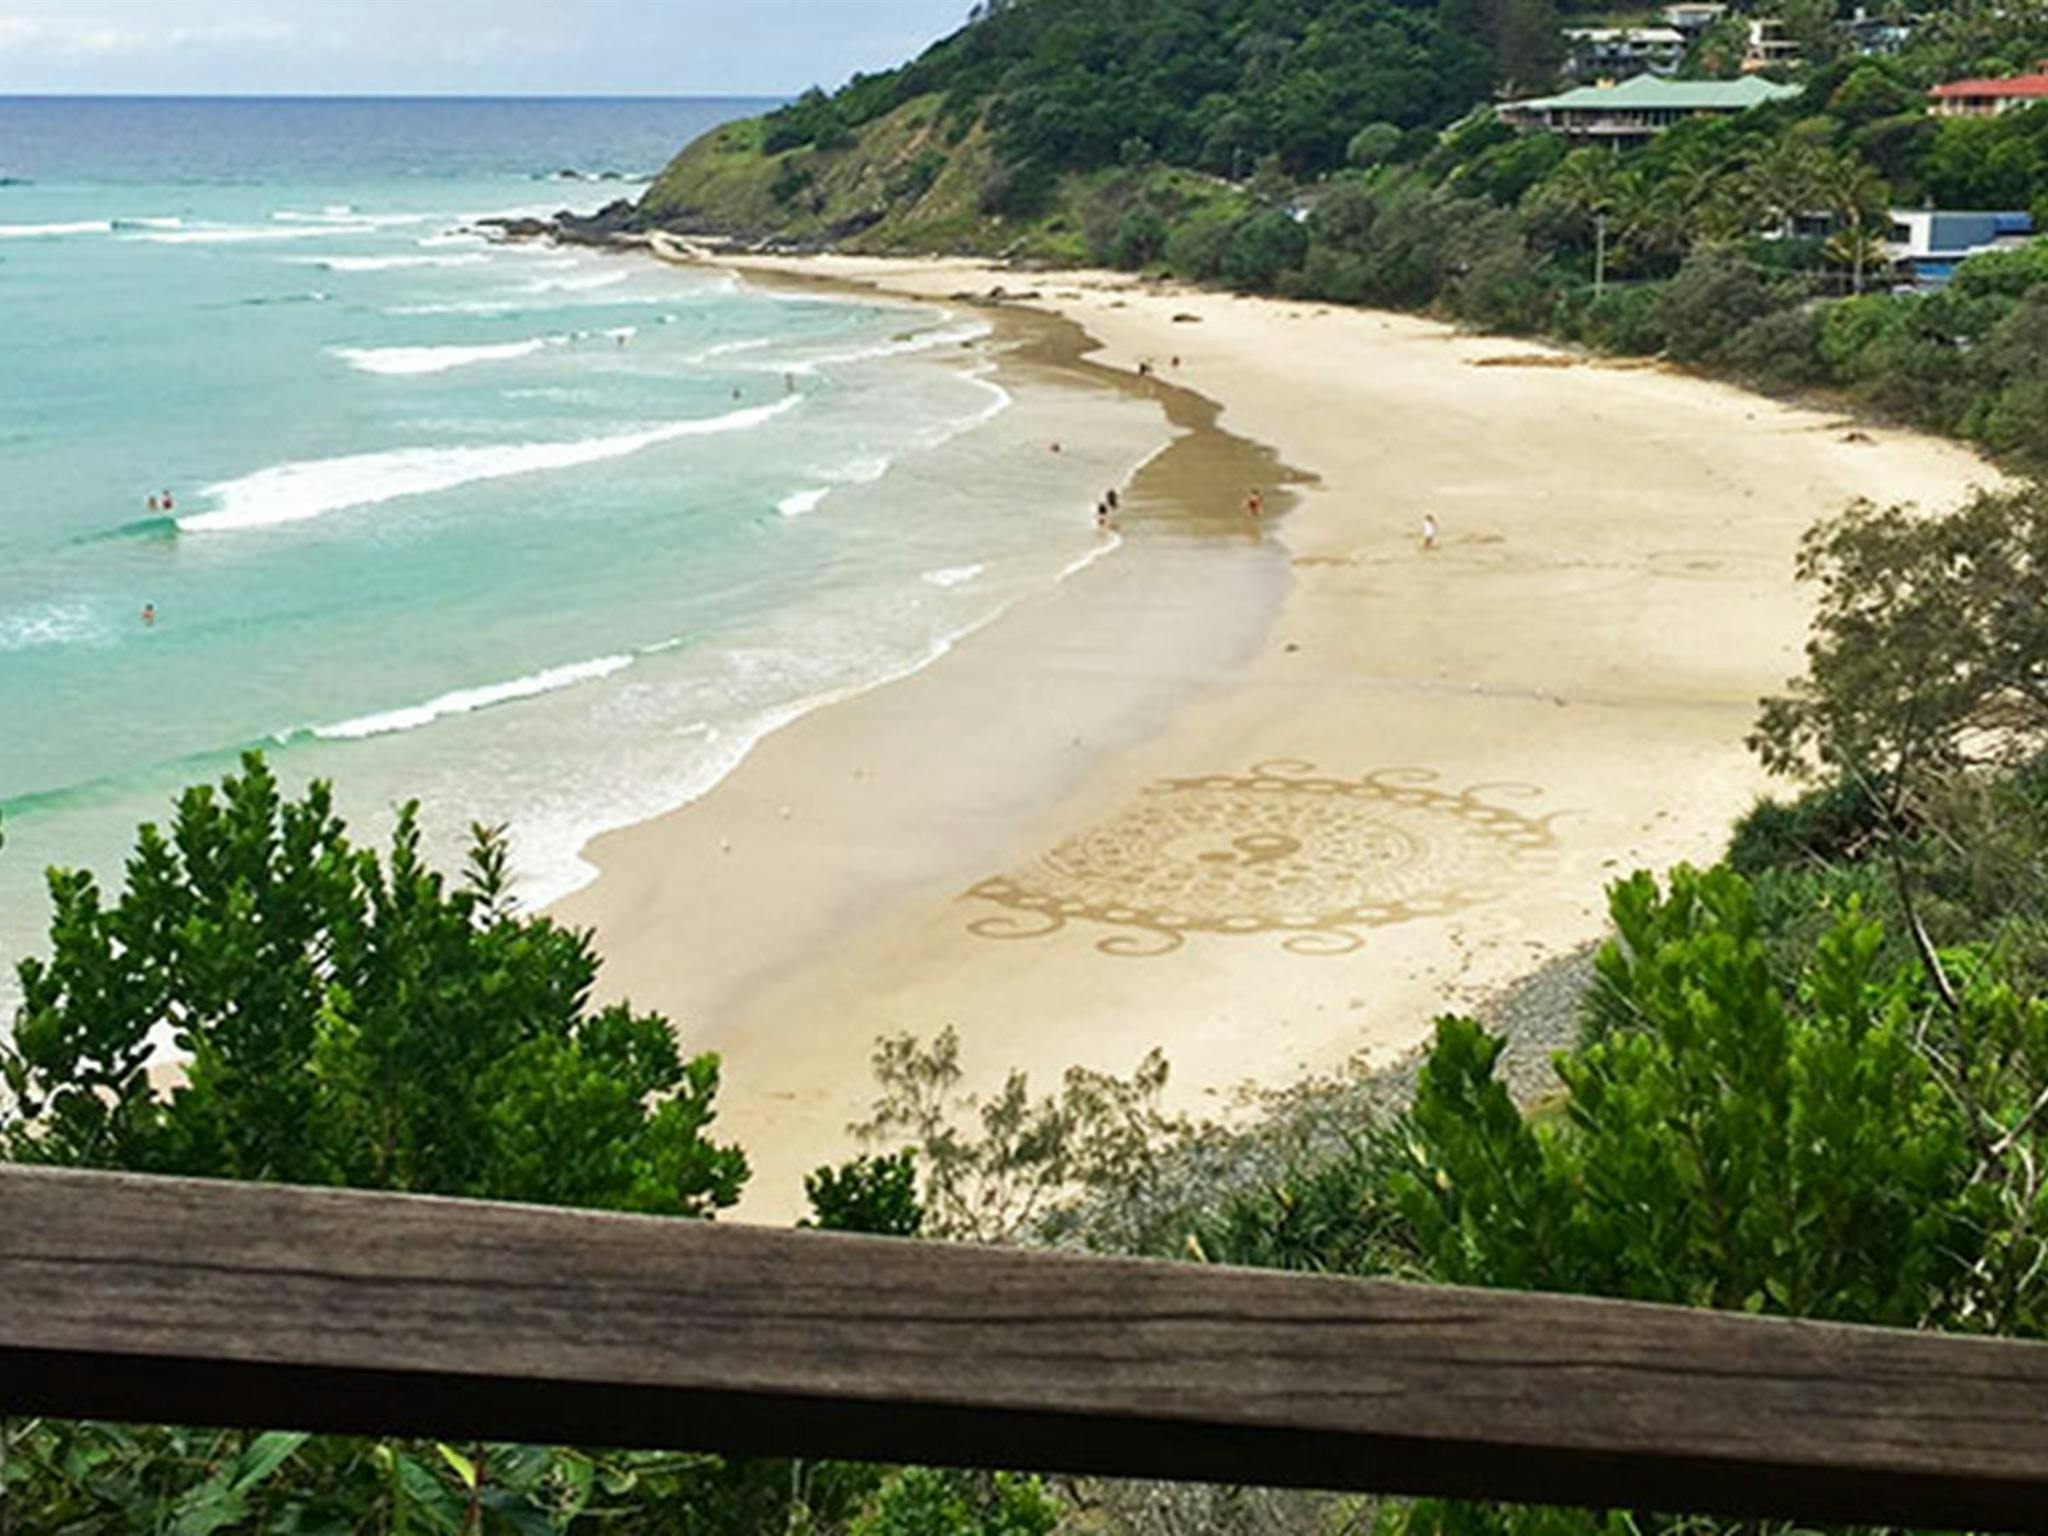 Byron Bay, North Coast – Accommodation, things to do, beaches